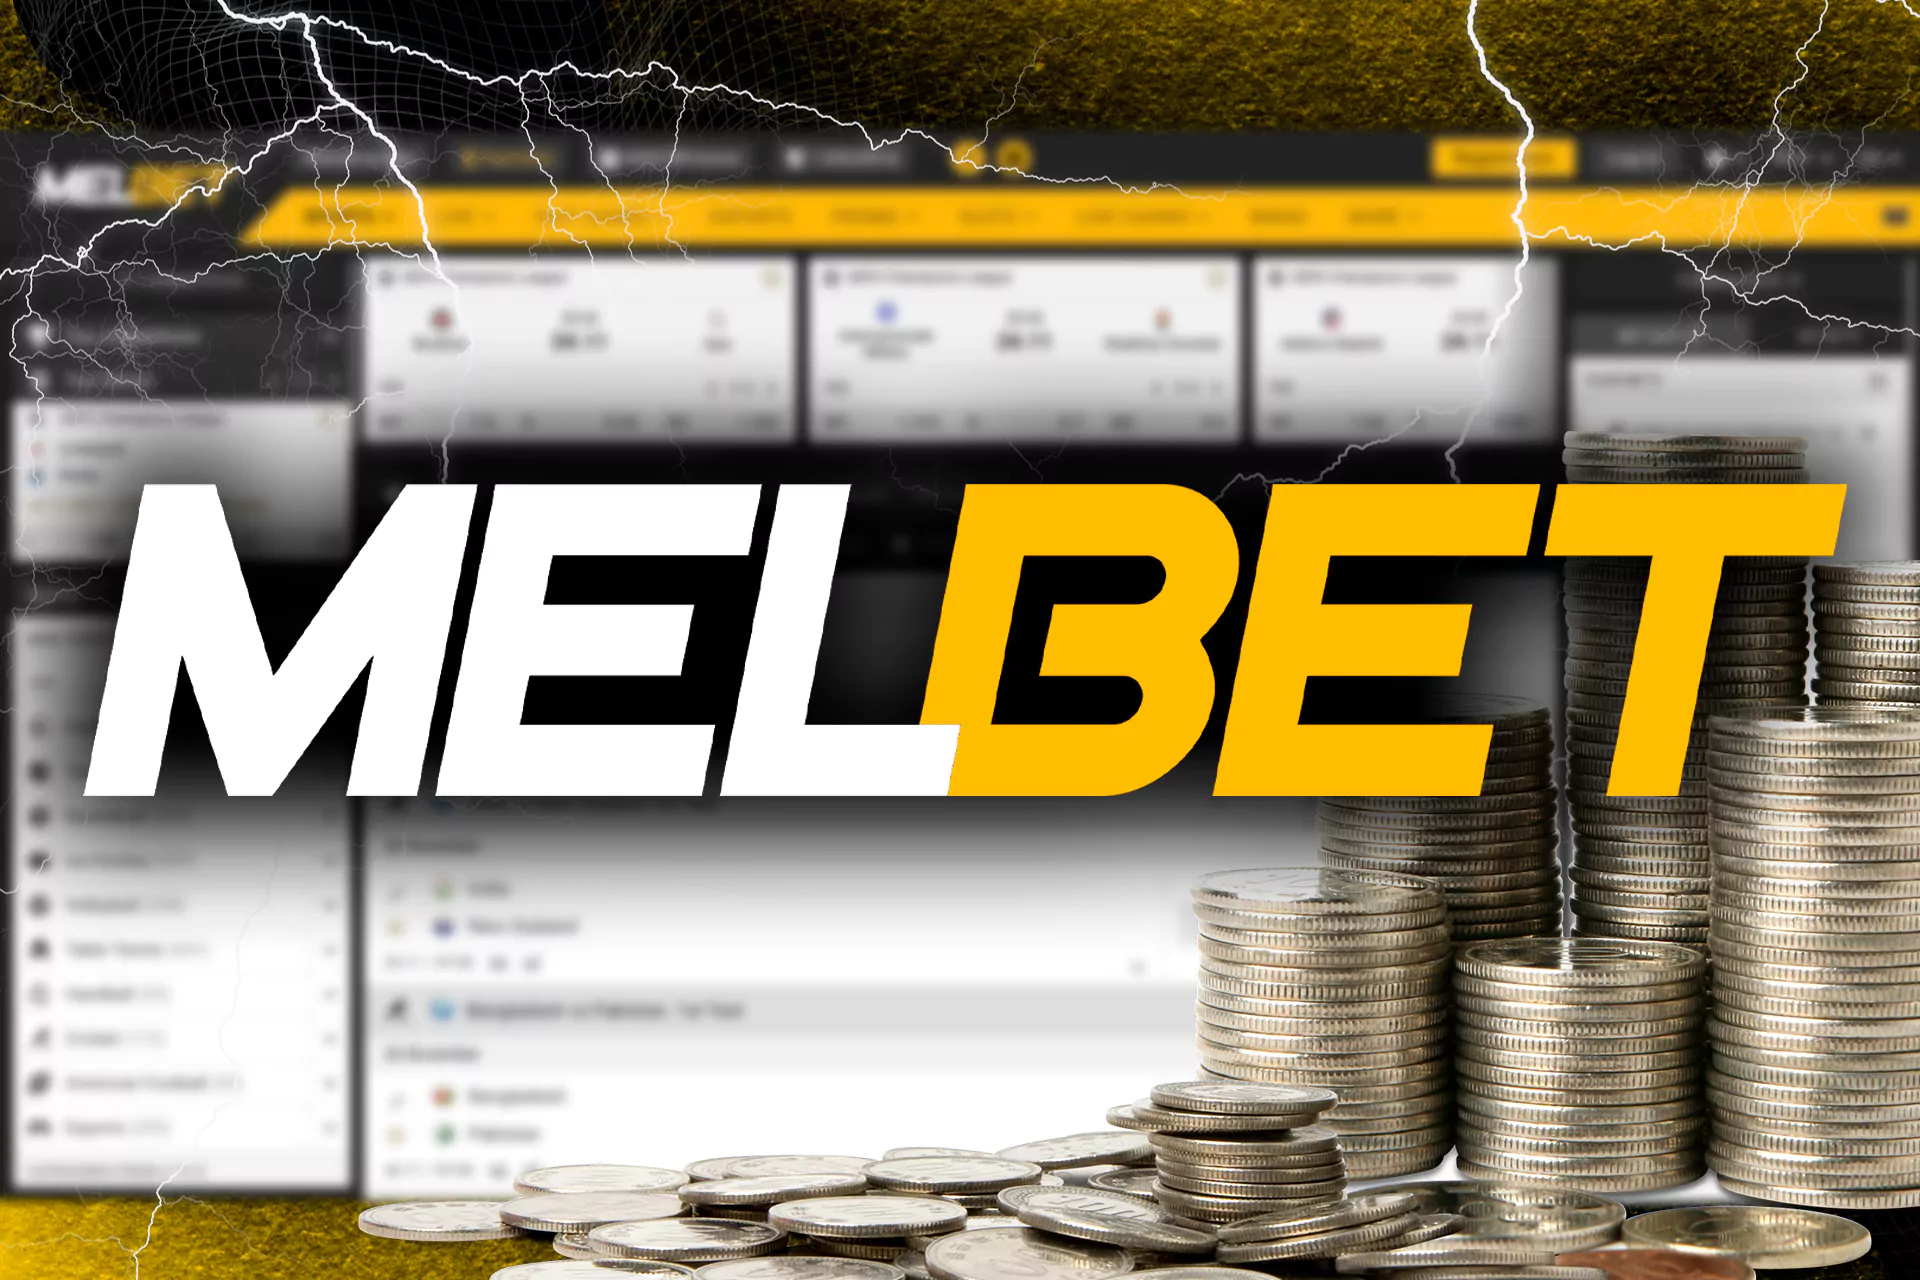 Melbet is a great and trustworthy bookmaker that is worth betting at.